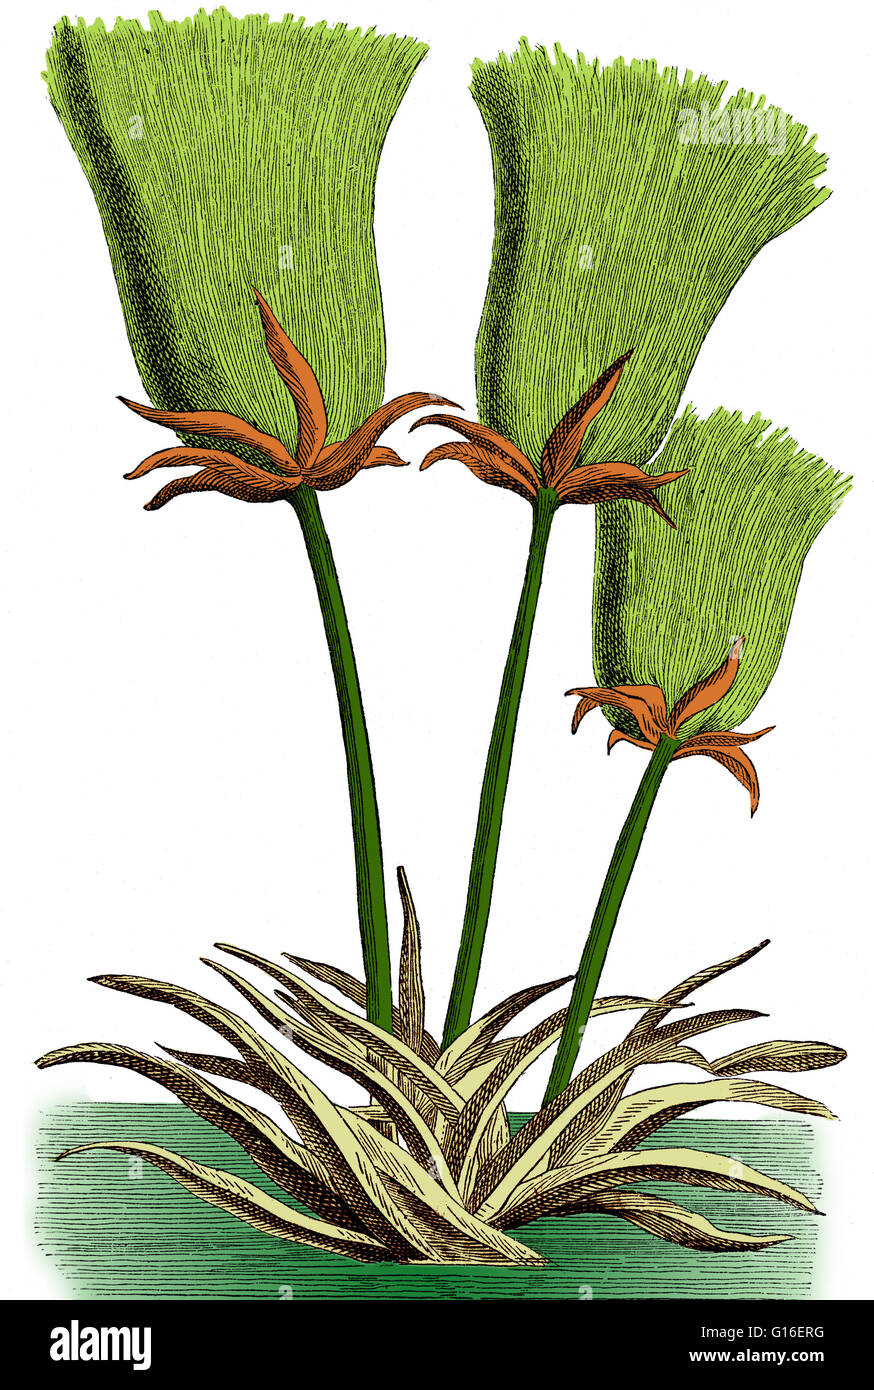 Colorized illustration of a Cyperus papyrus plant. Cyperus papyrus is a wetland sedge that produces a thick paper-like material, papyrus. Ancient Egyptians used this plant as a writing material and for boats, mattresses, mats, rope, sandals, and baskets. Stock Photo